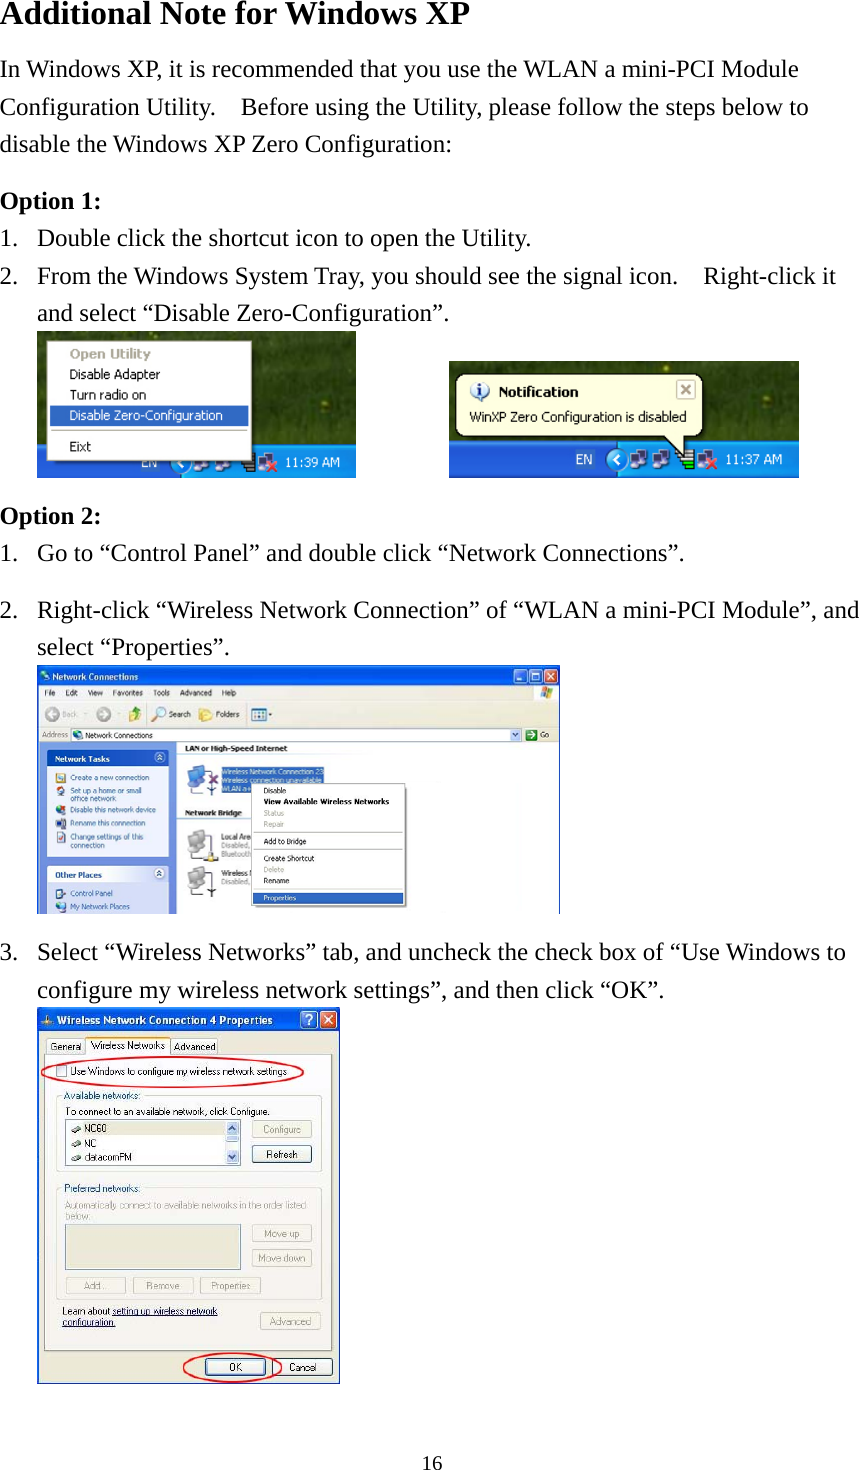  16Additional Note for Windows XP   In Windows XP, it is recommended that you use the WLAN a mini-PCI Module Configuration Utility.    Before using the Utility, please follow the steps below to disable the Windows XP Zero Configuration:  Option 1: 1.  Double click the shortcut icon to open the Utility. 2.  From the Windows System Tray, you should see the signal icon.    Right-click it and select “Disable Zero-Configuration”.     Option 2: 1.  Go to “Control Panel” and double click “Network Connections”.  2.  Right-click “Wireless Network Connection” of “WLAN a mini-PCI Module”, and select “Properties”.   3.  Select “Wireless Networks” tab, and uncheck the check box of “Use Windows to configure my wireless network settings”, and then click “OK”.  